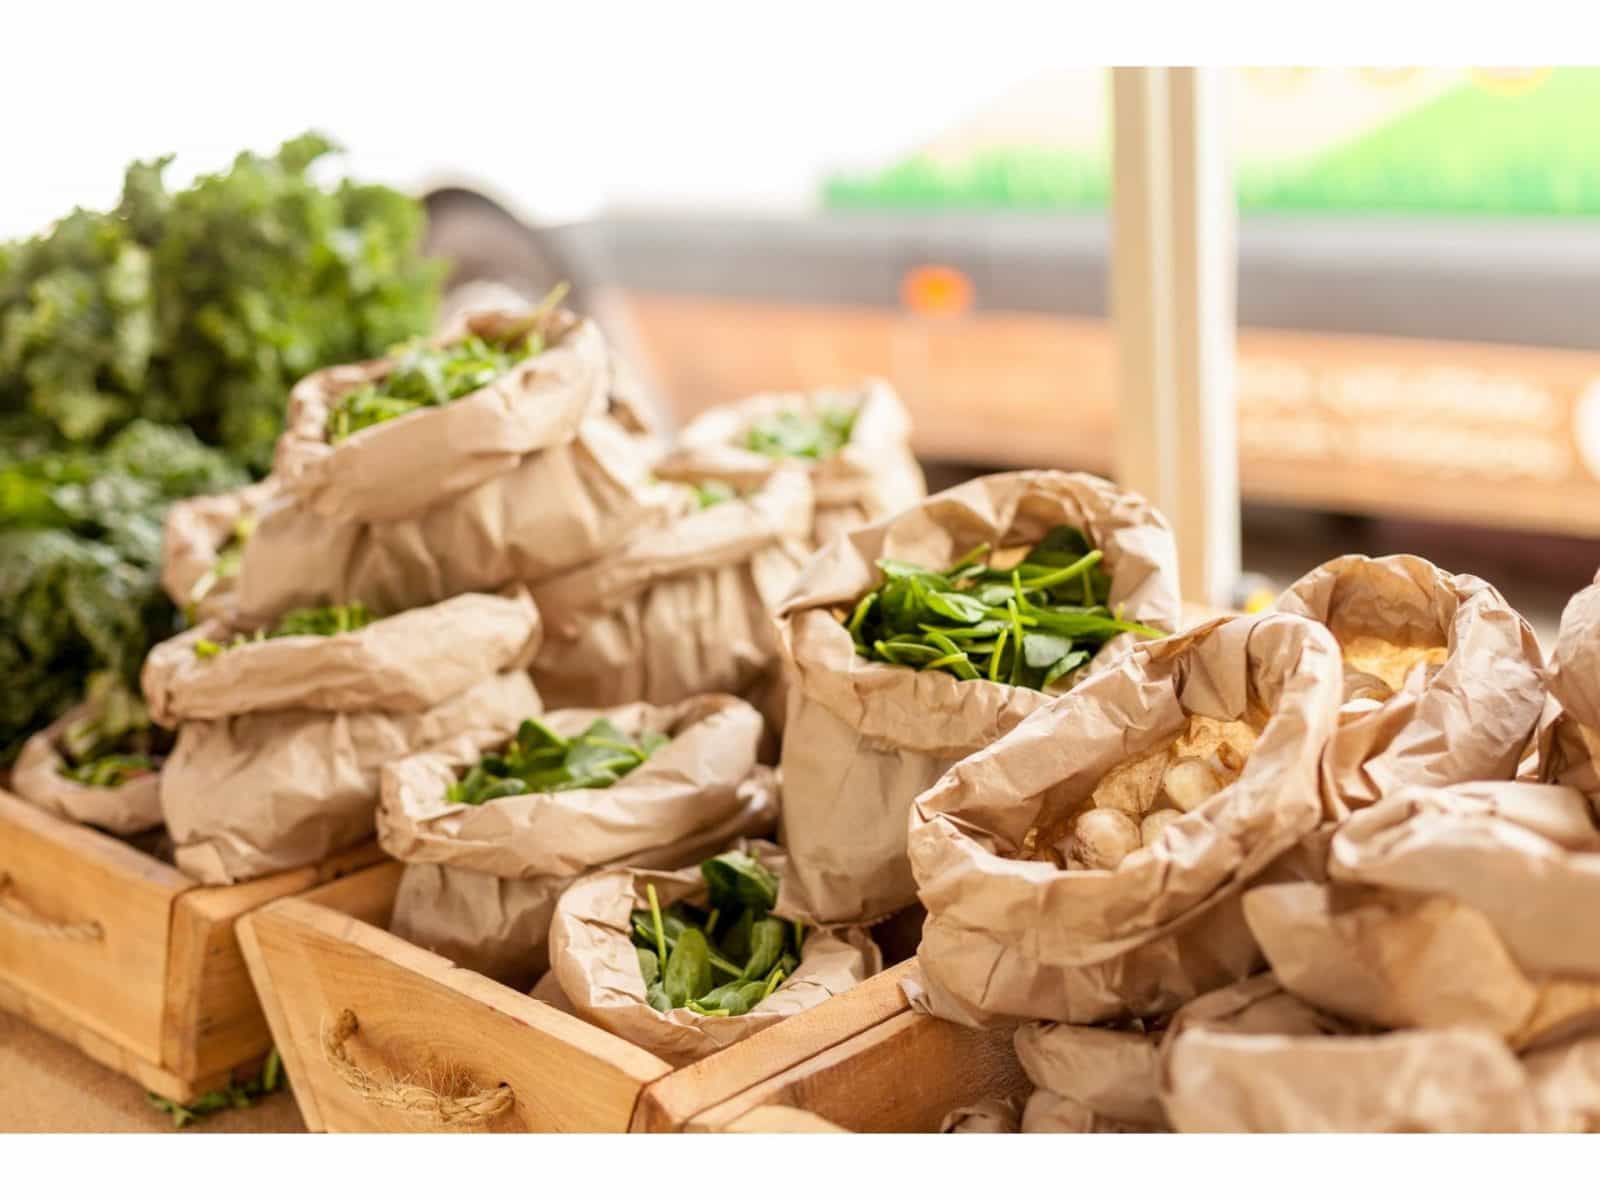 Bags of fresh spinach and mushrooms on display at a market stall